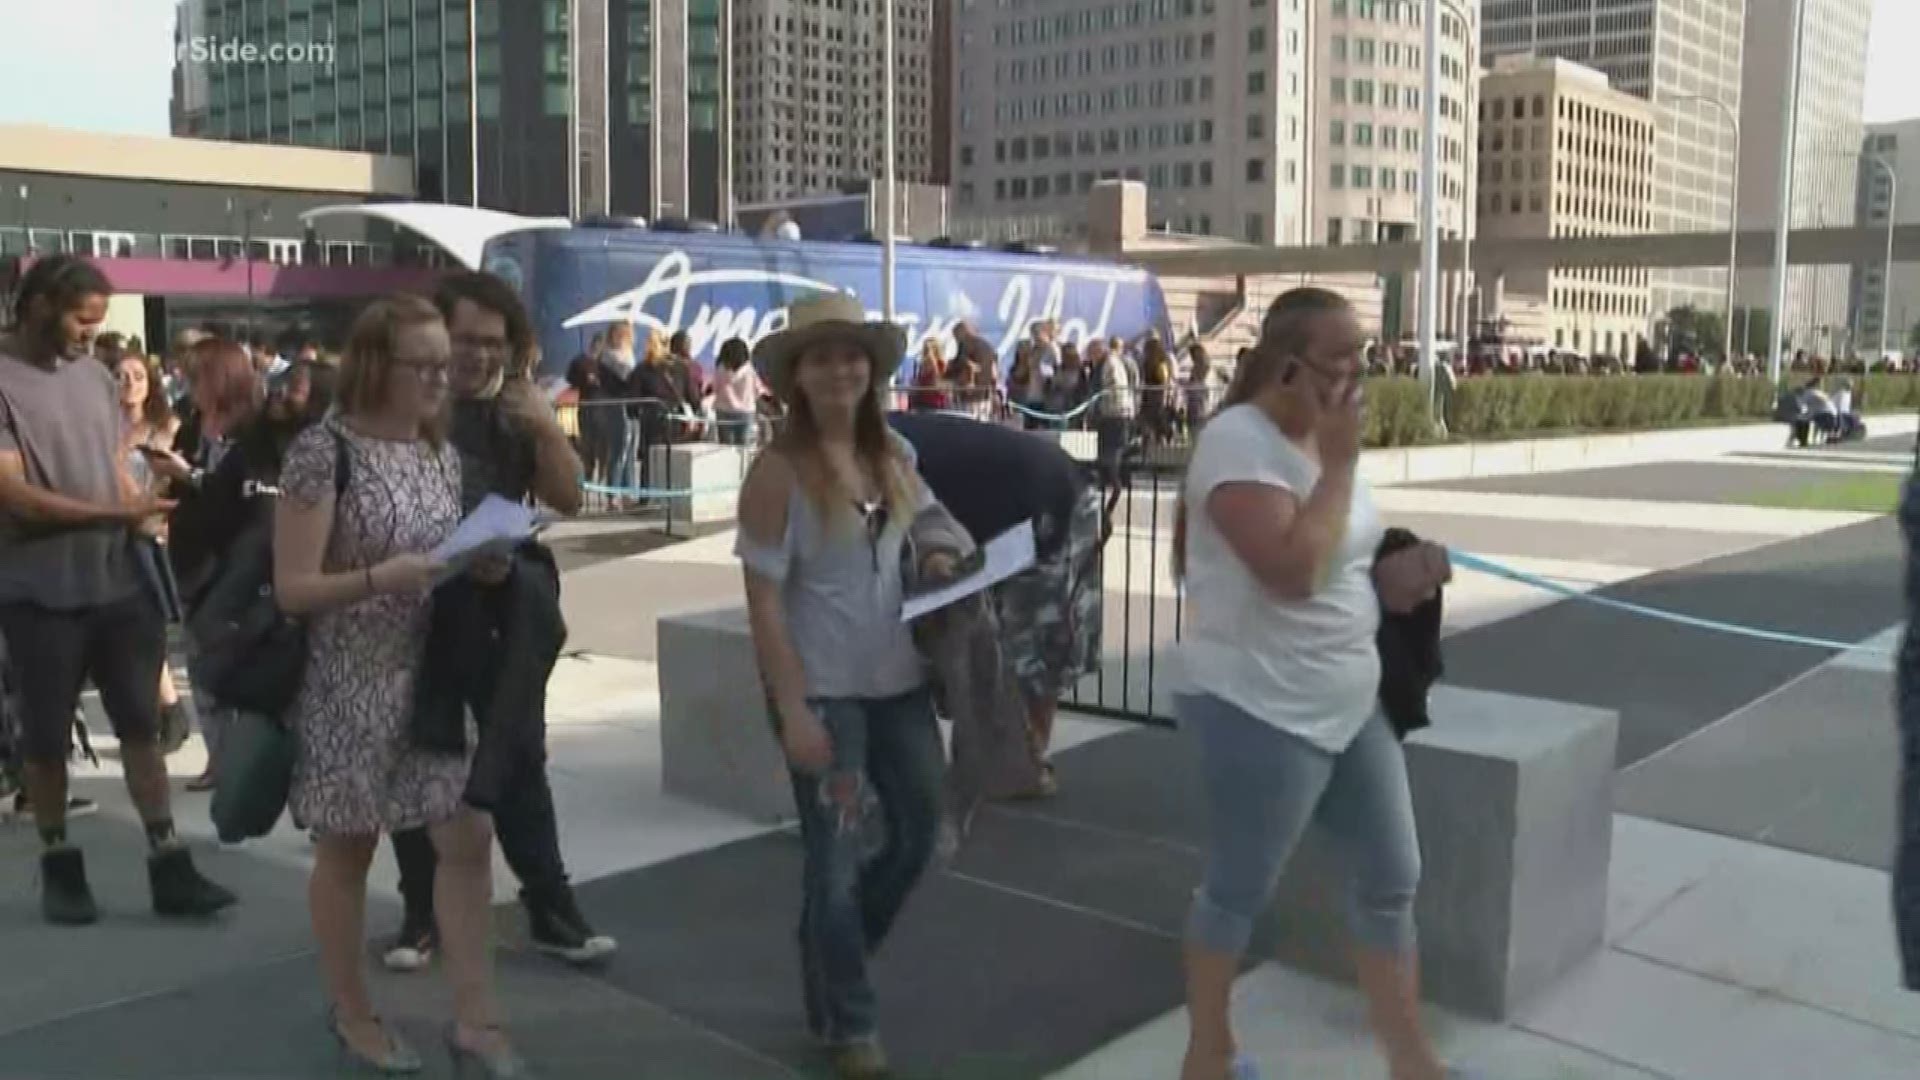 My West Michigan's Kirk Montgomery took a little road trip to the Motor City to check out the American Idol audition and catch up with the hopefuls in line.